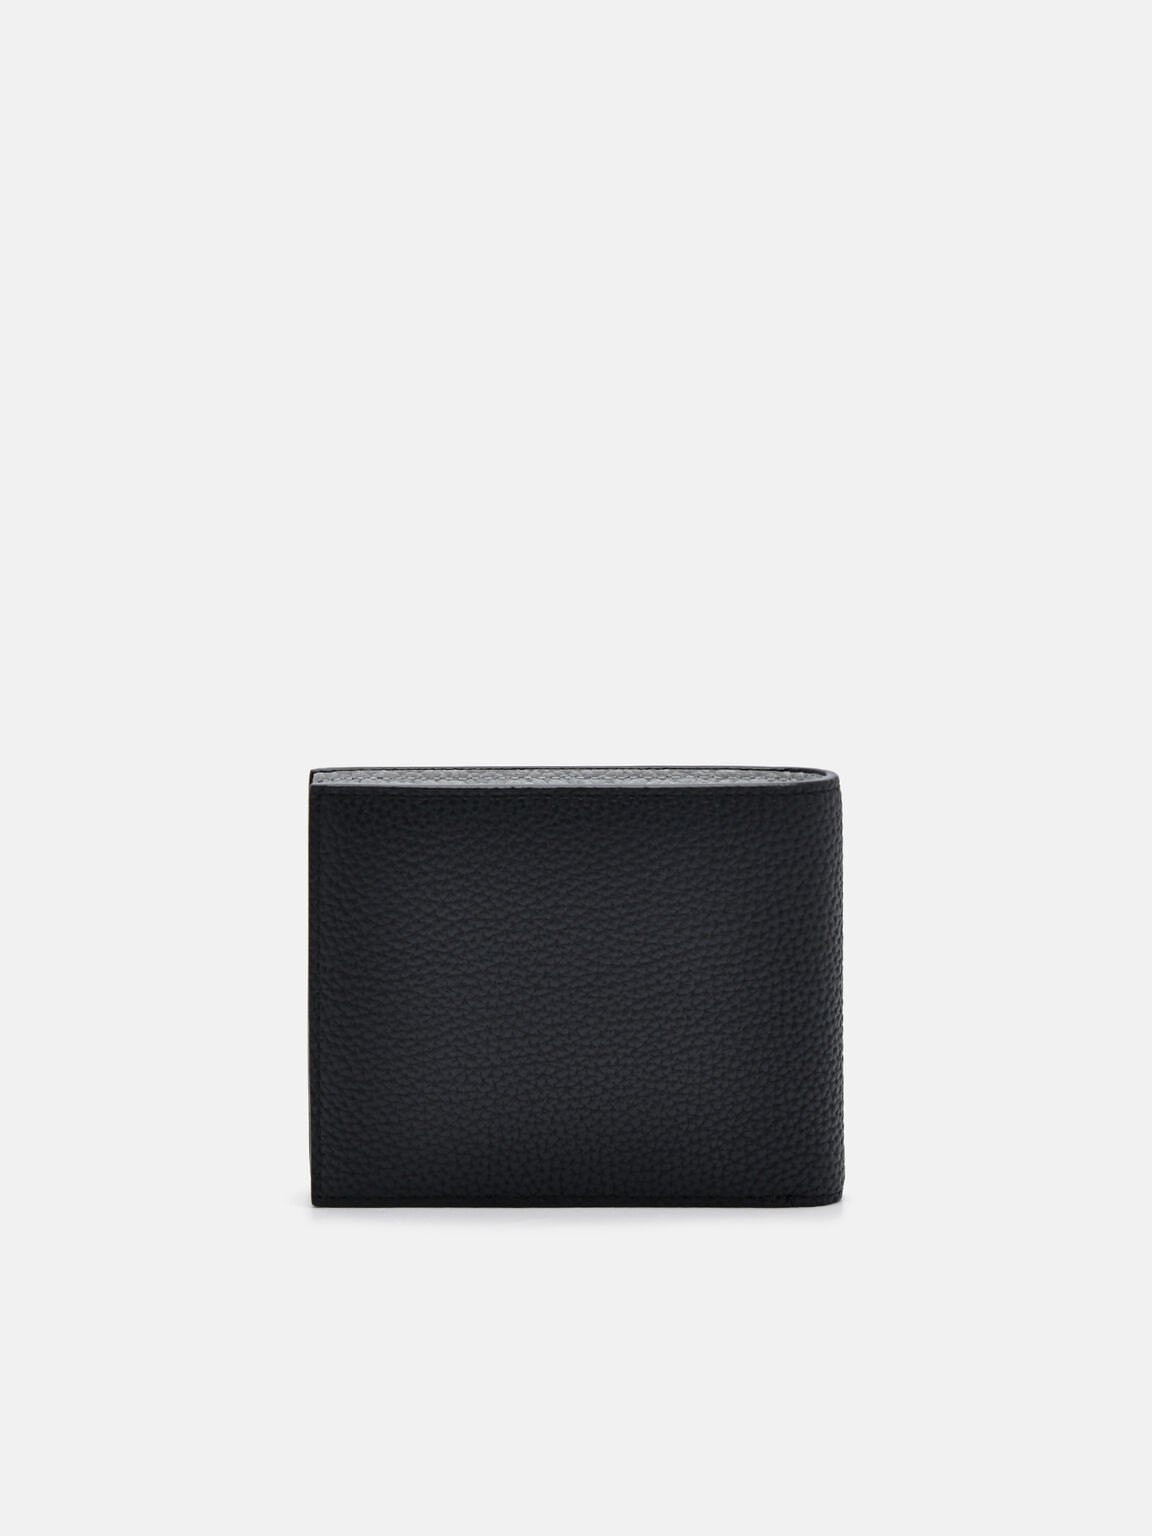 Black Embossed Leather Bi-Fold Wallet with Coin Pouch - PEDRO SG